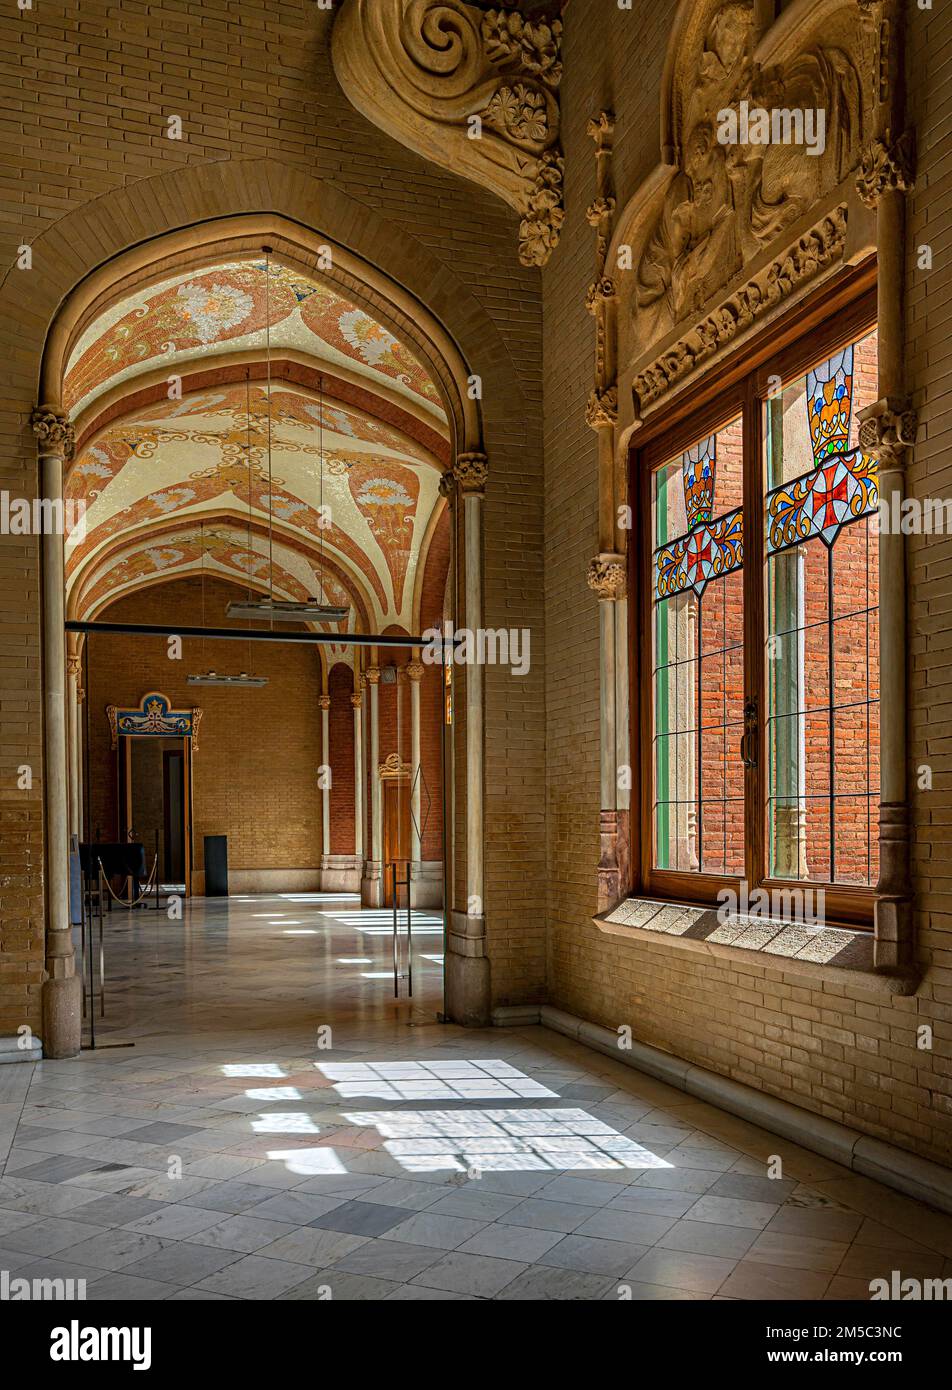 Interior view of the hall and corridors in the main building in the Hospital de la Santa Creu i Sant Pau by architect Lluis Domenech i Montaner Stock Photo